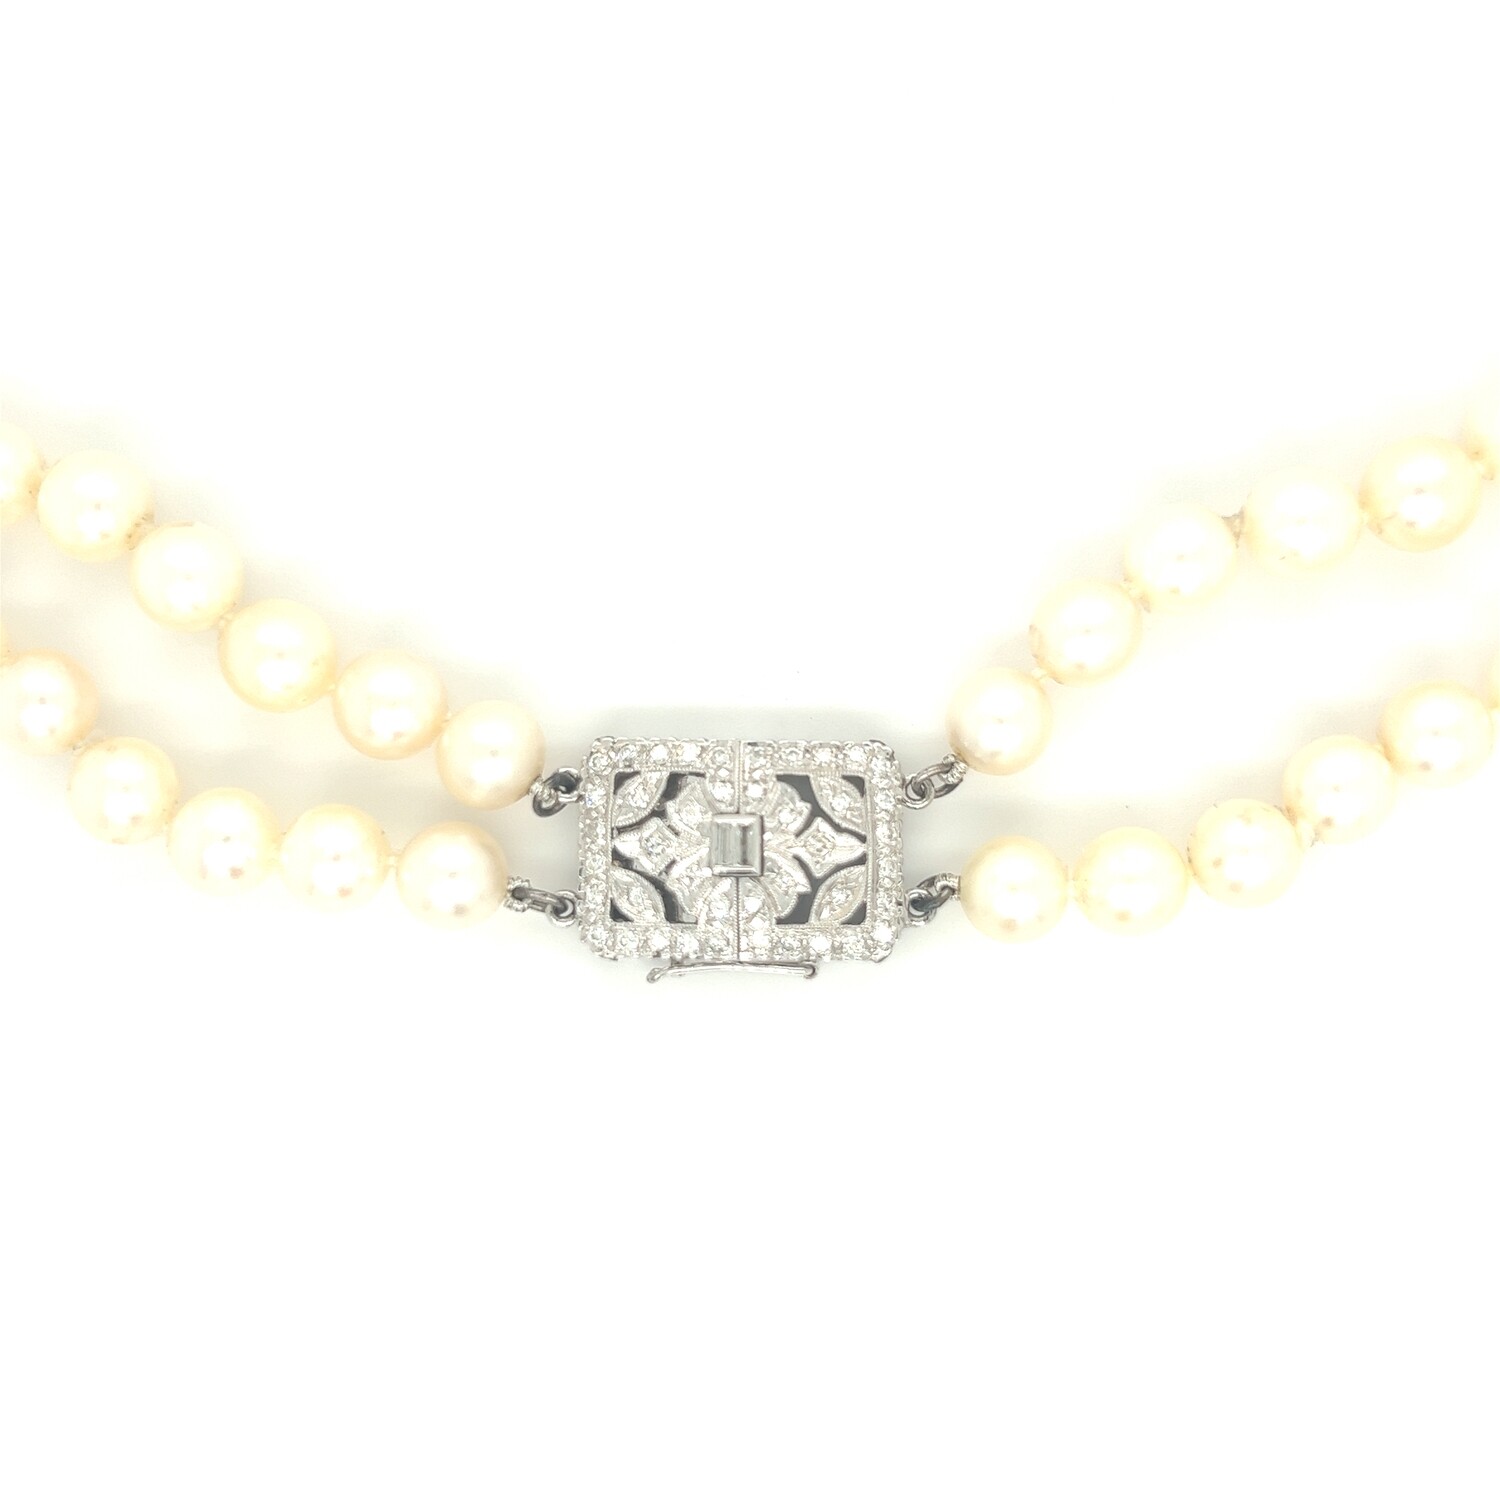 Pearl & Diamond Necklace in 14k White Gold